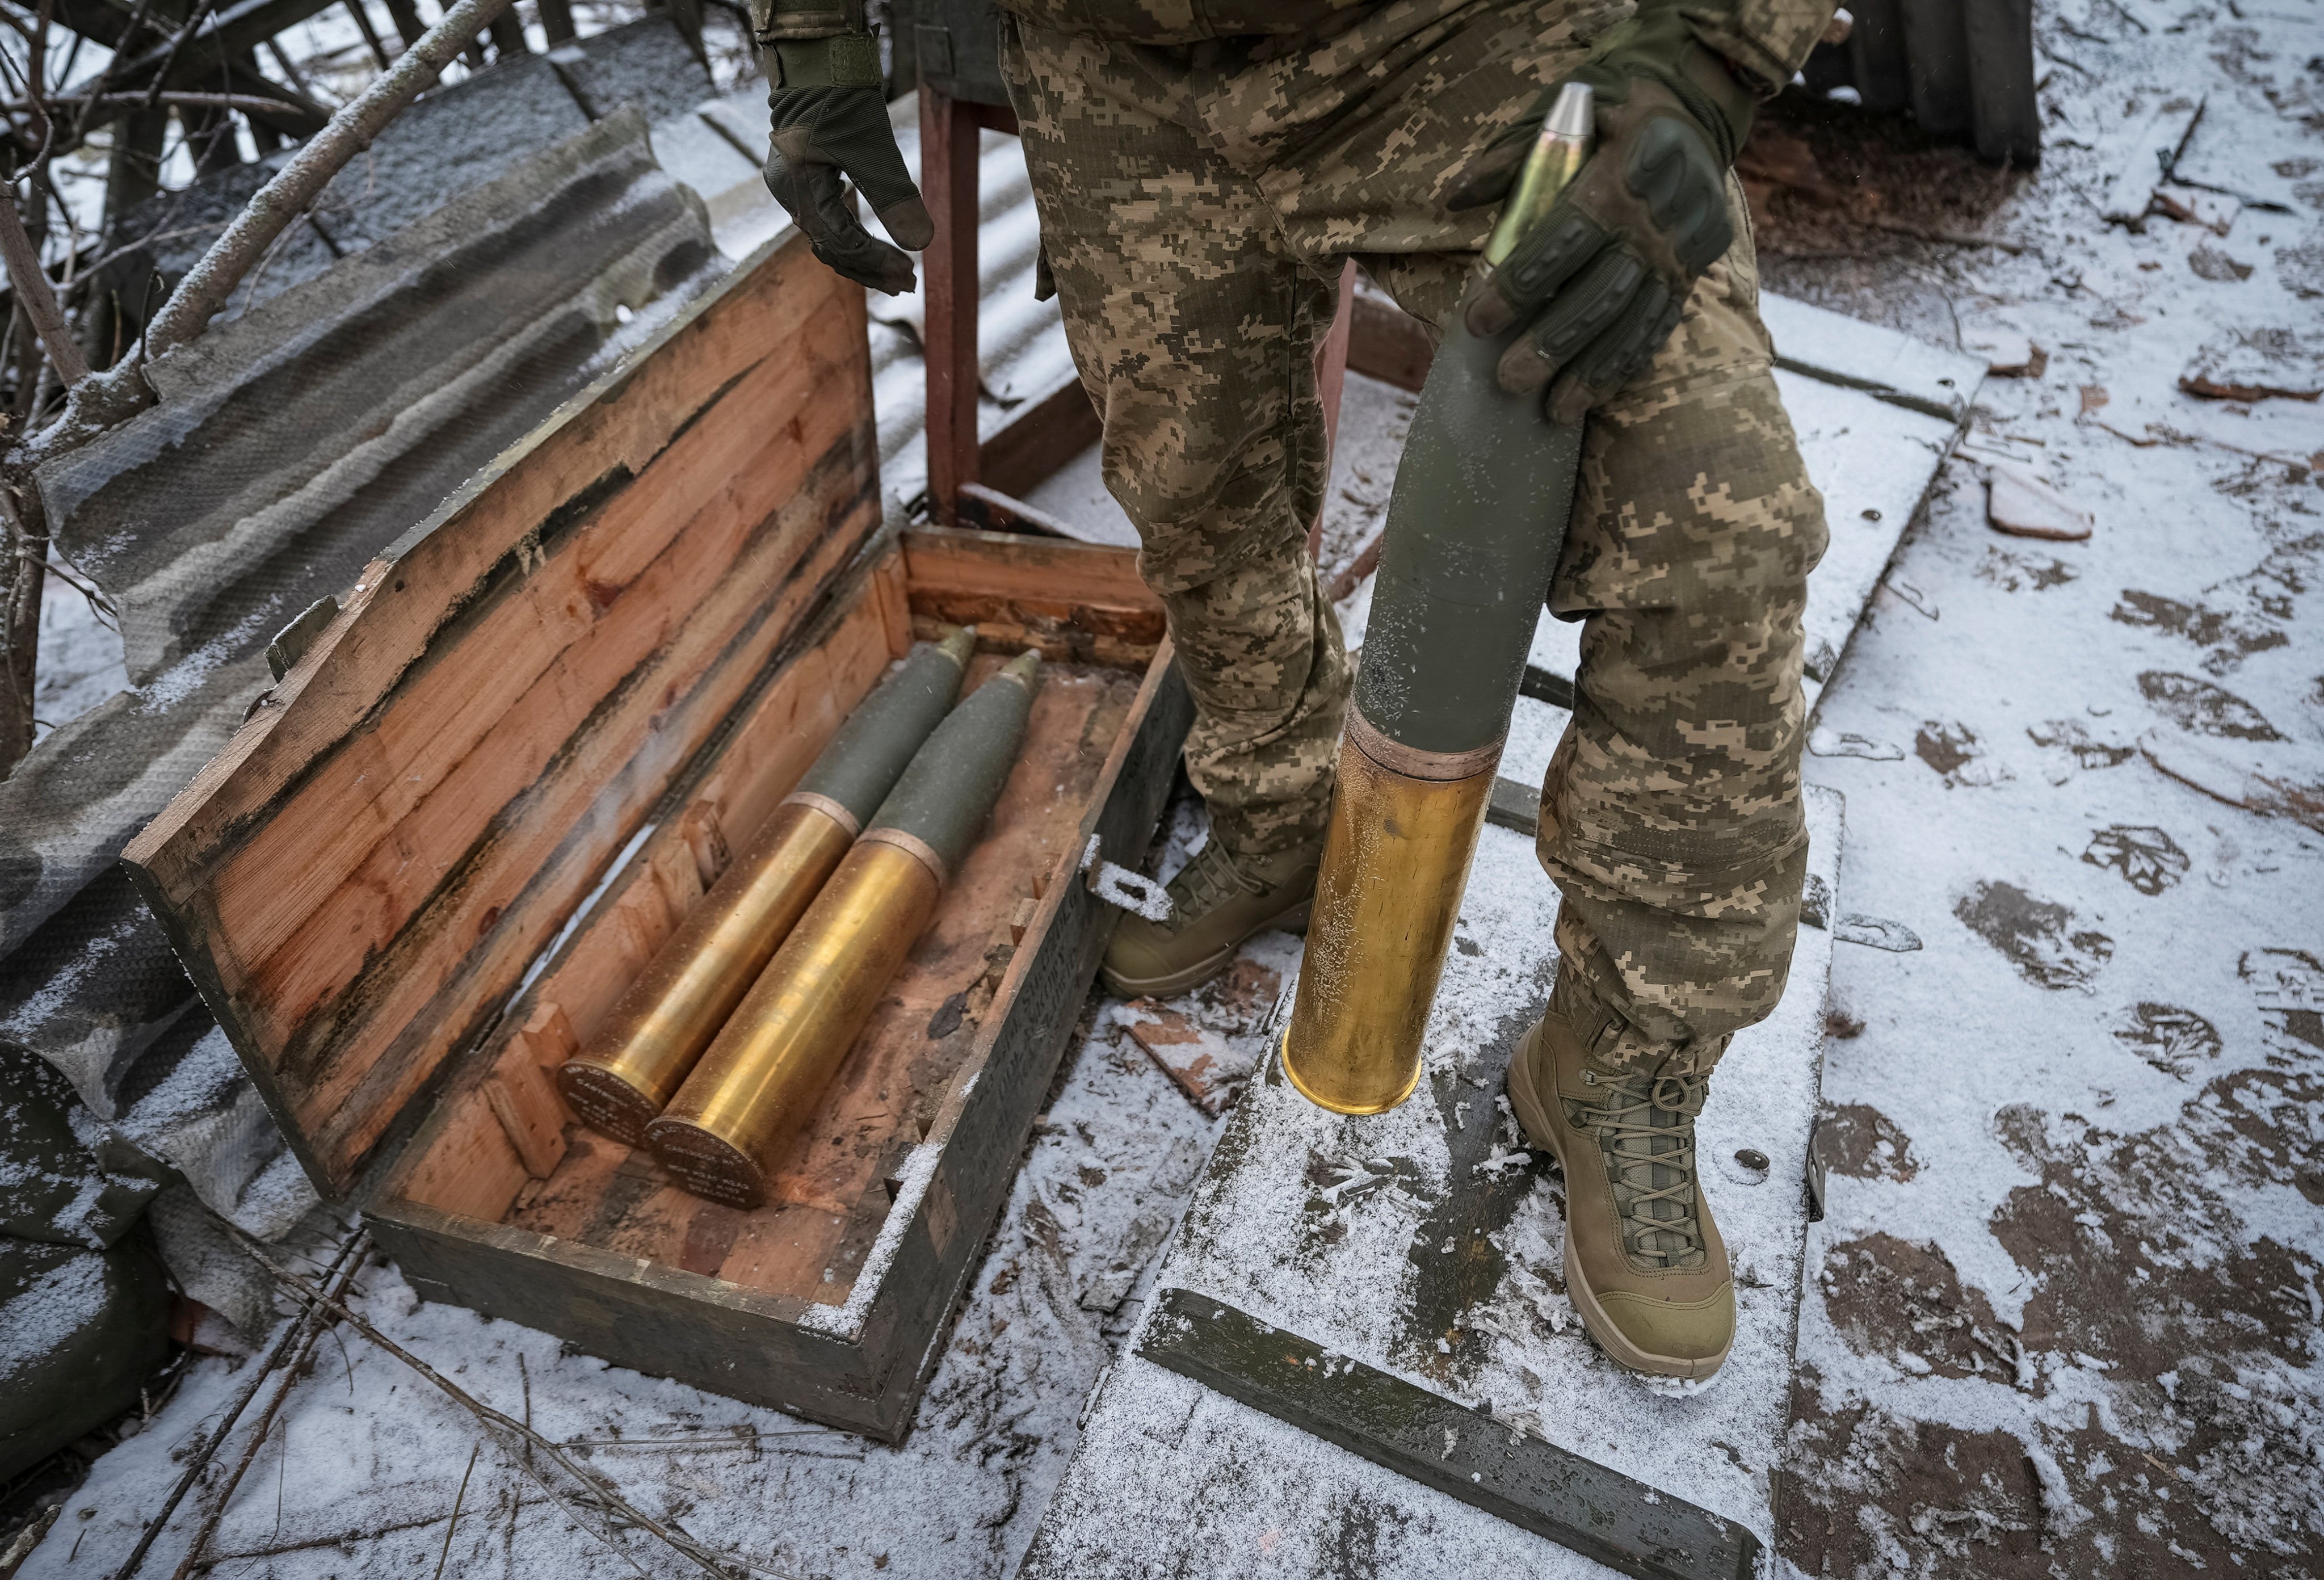 Ukraine has pleaded for more artillery shells from Western allies. Photo: Reuters